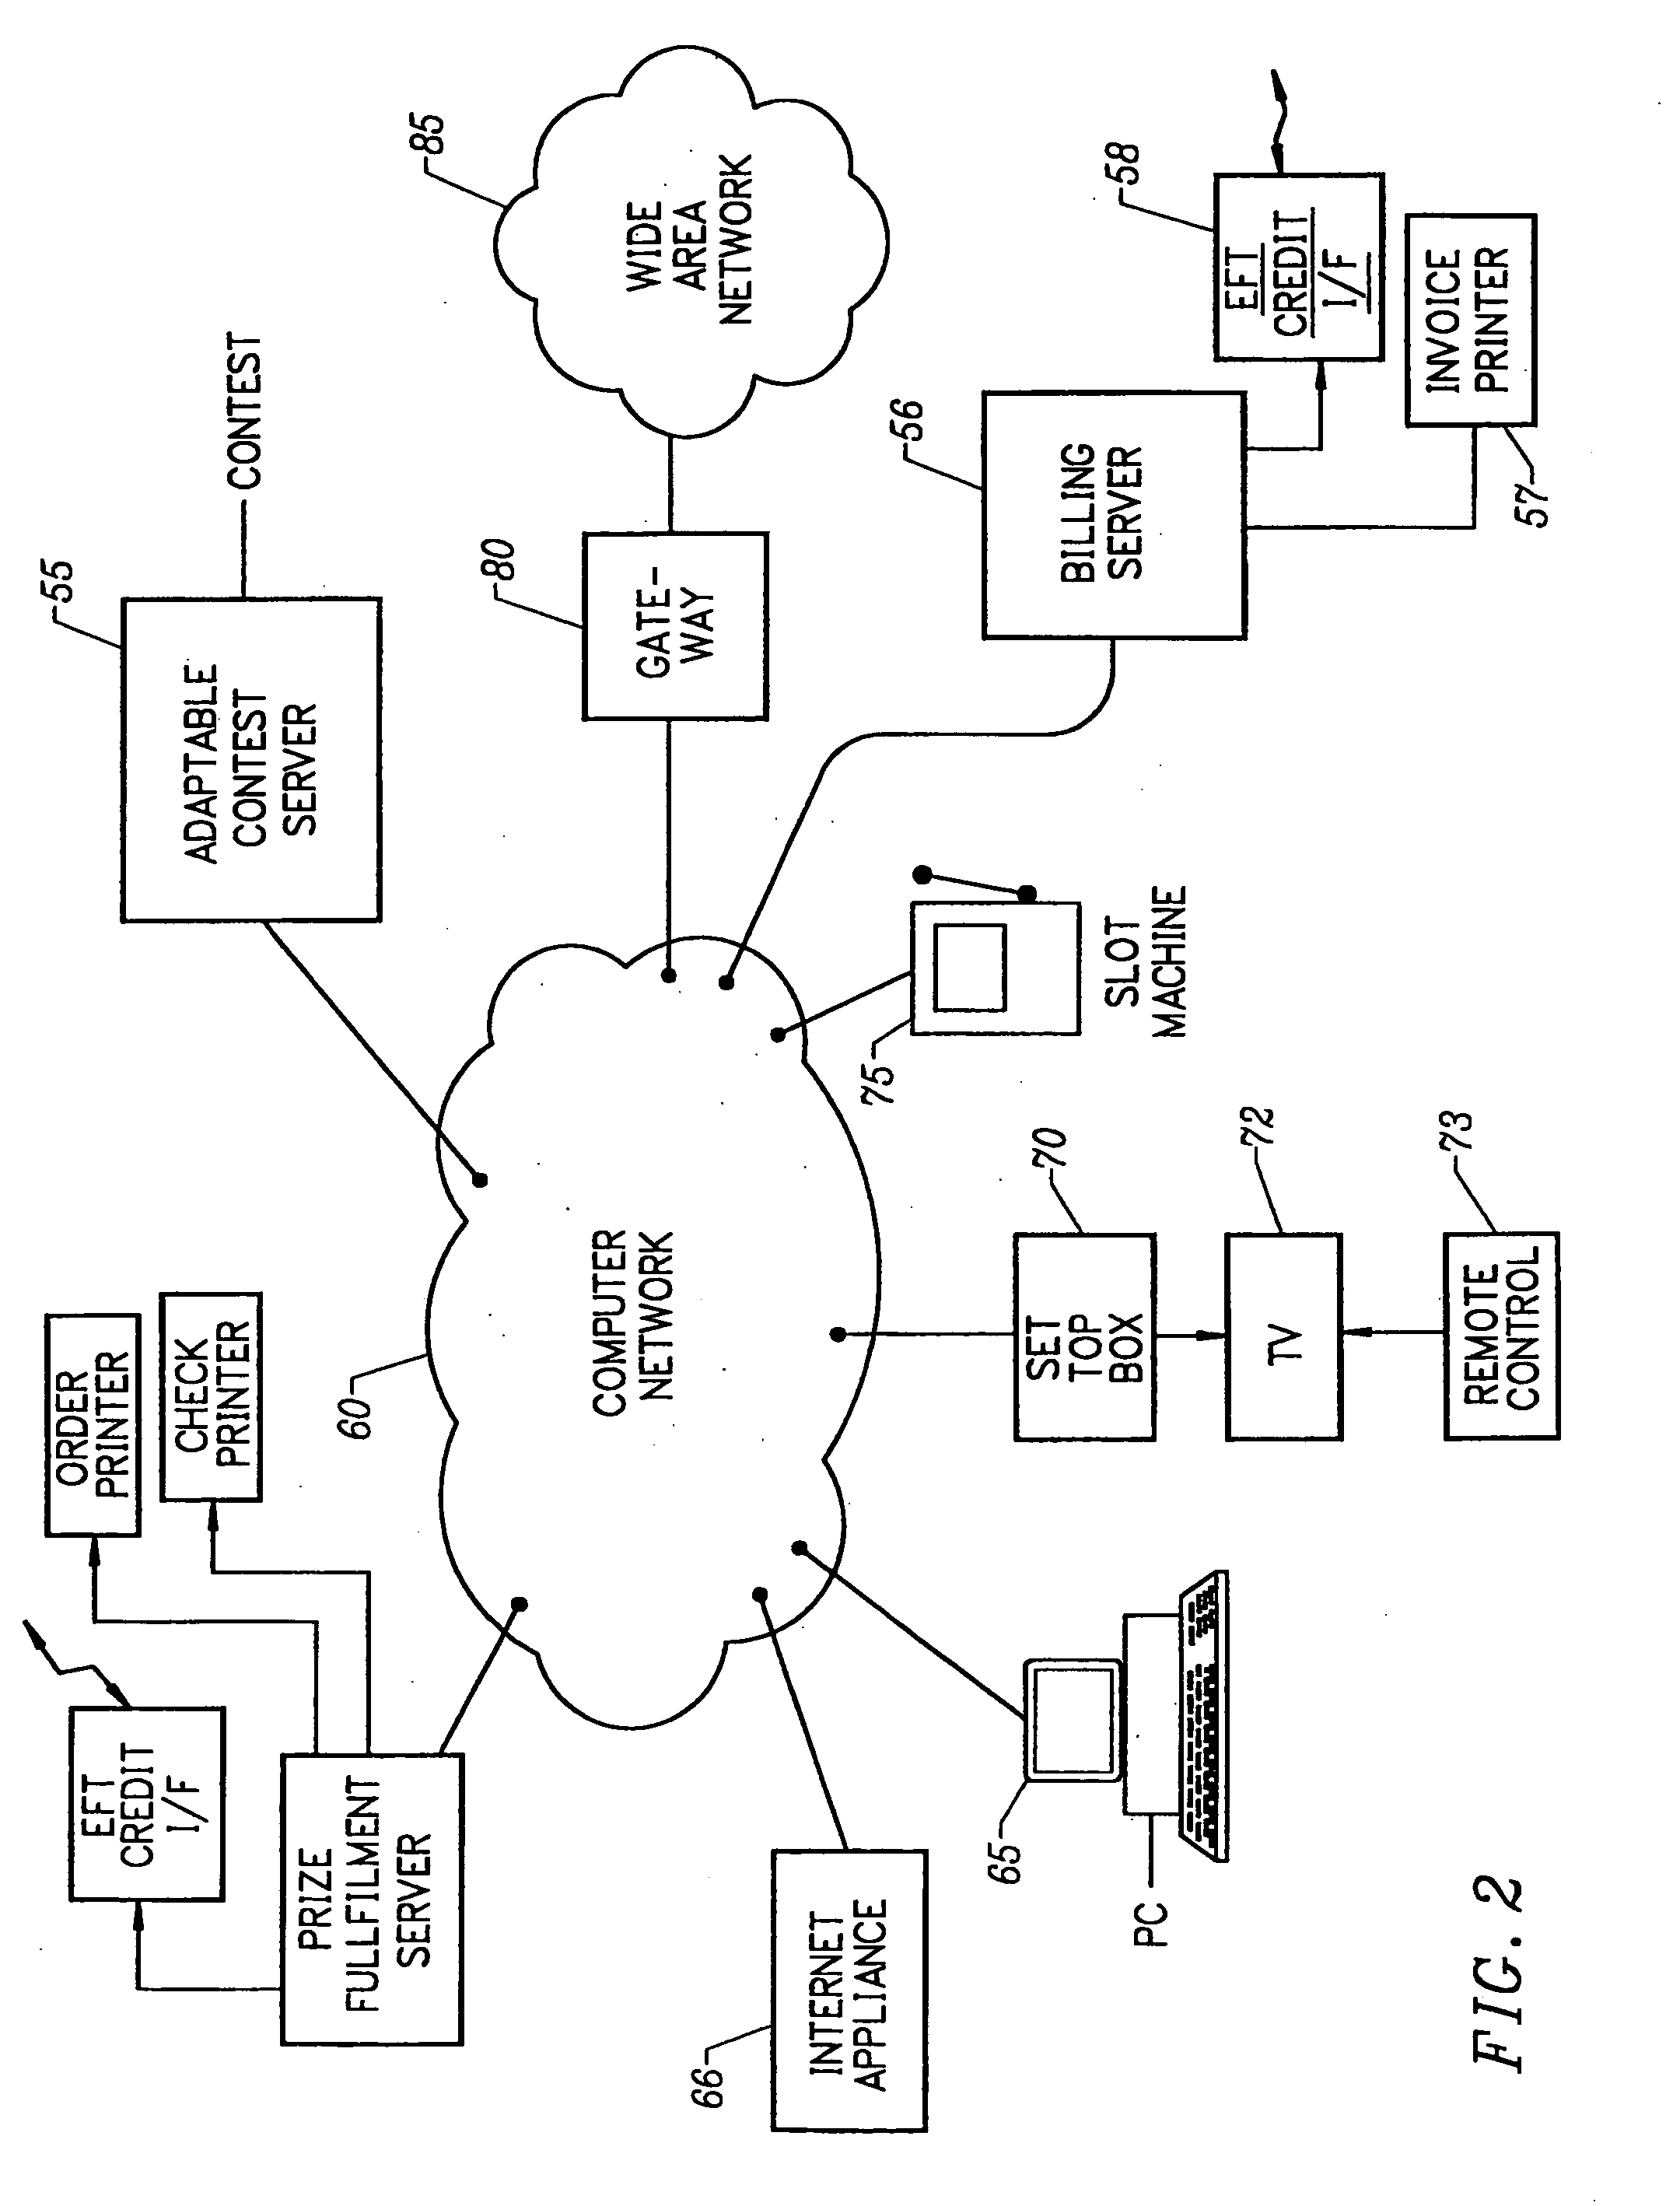 System and method for associating products that are potential prizes with a game of chance